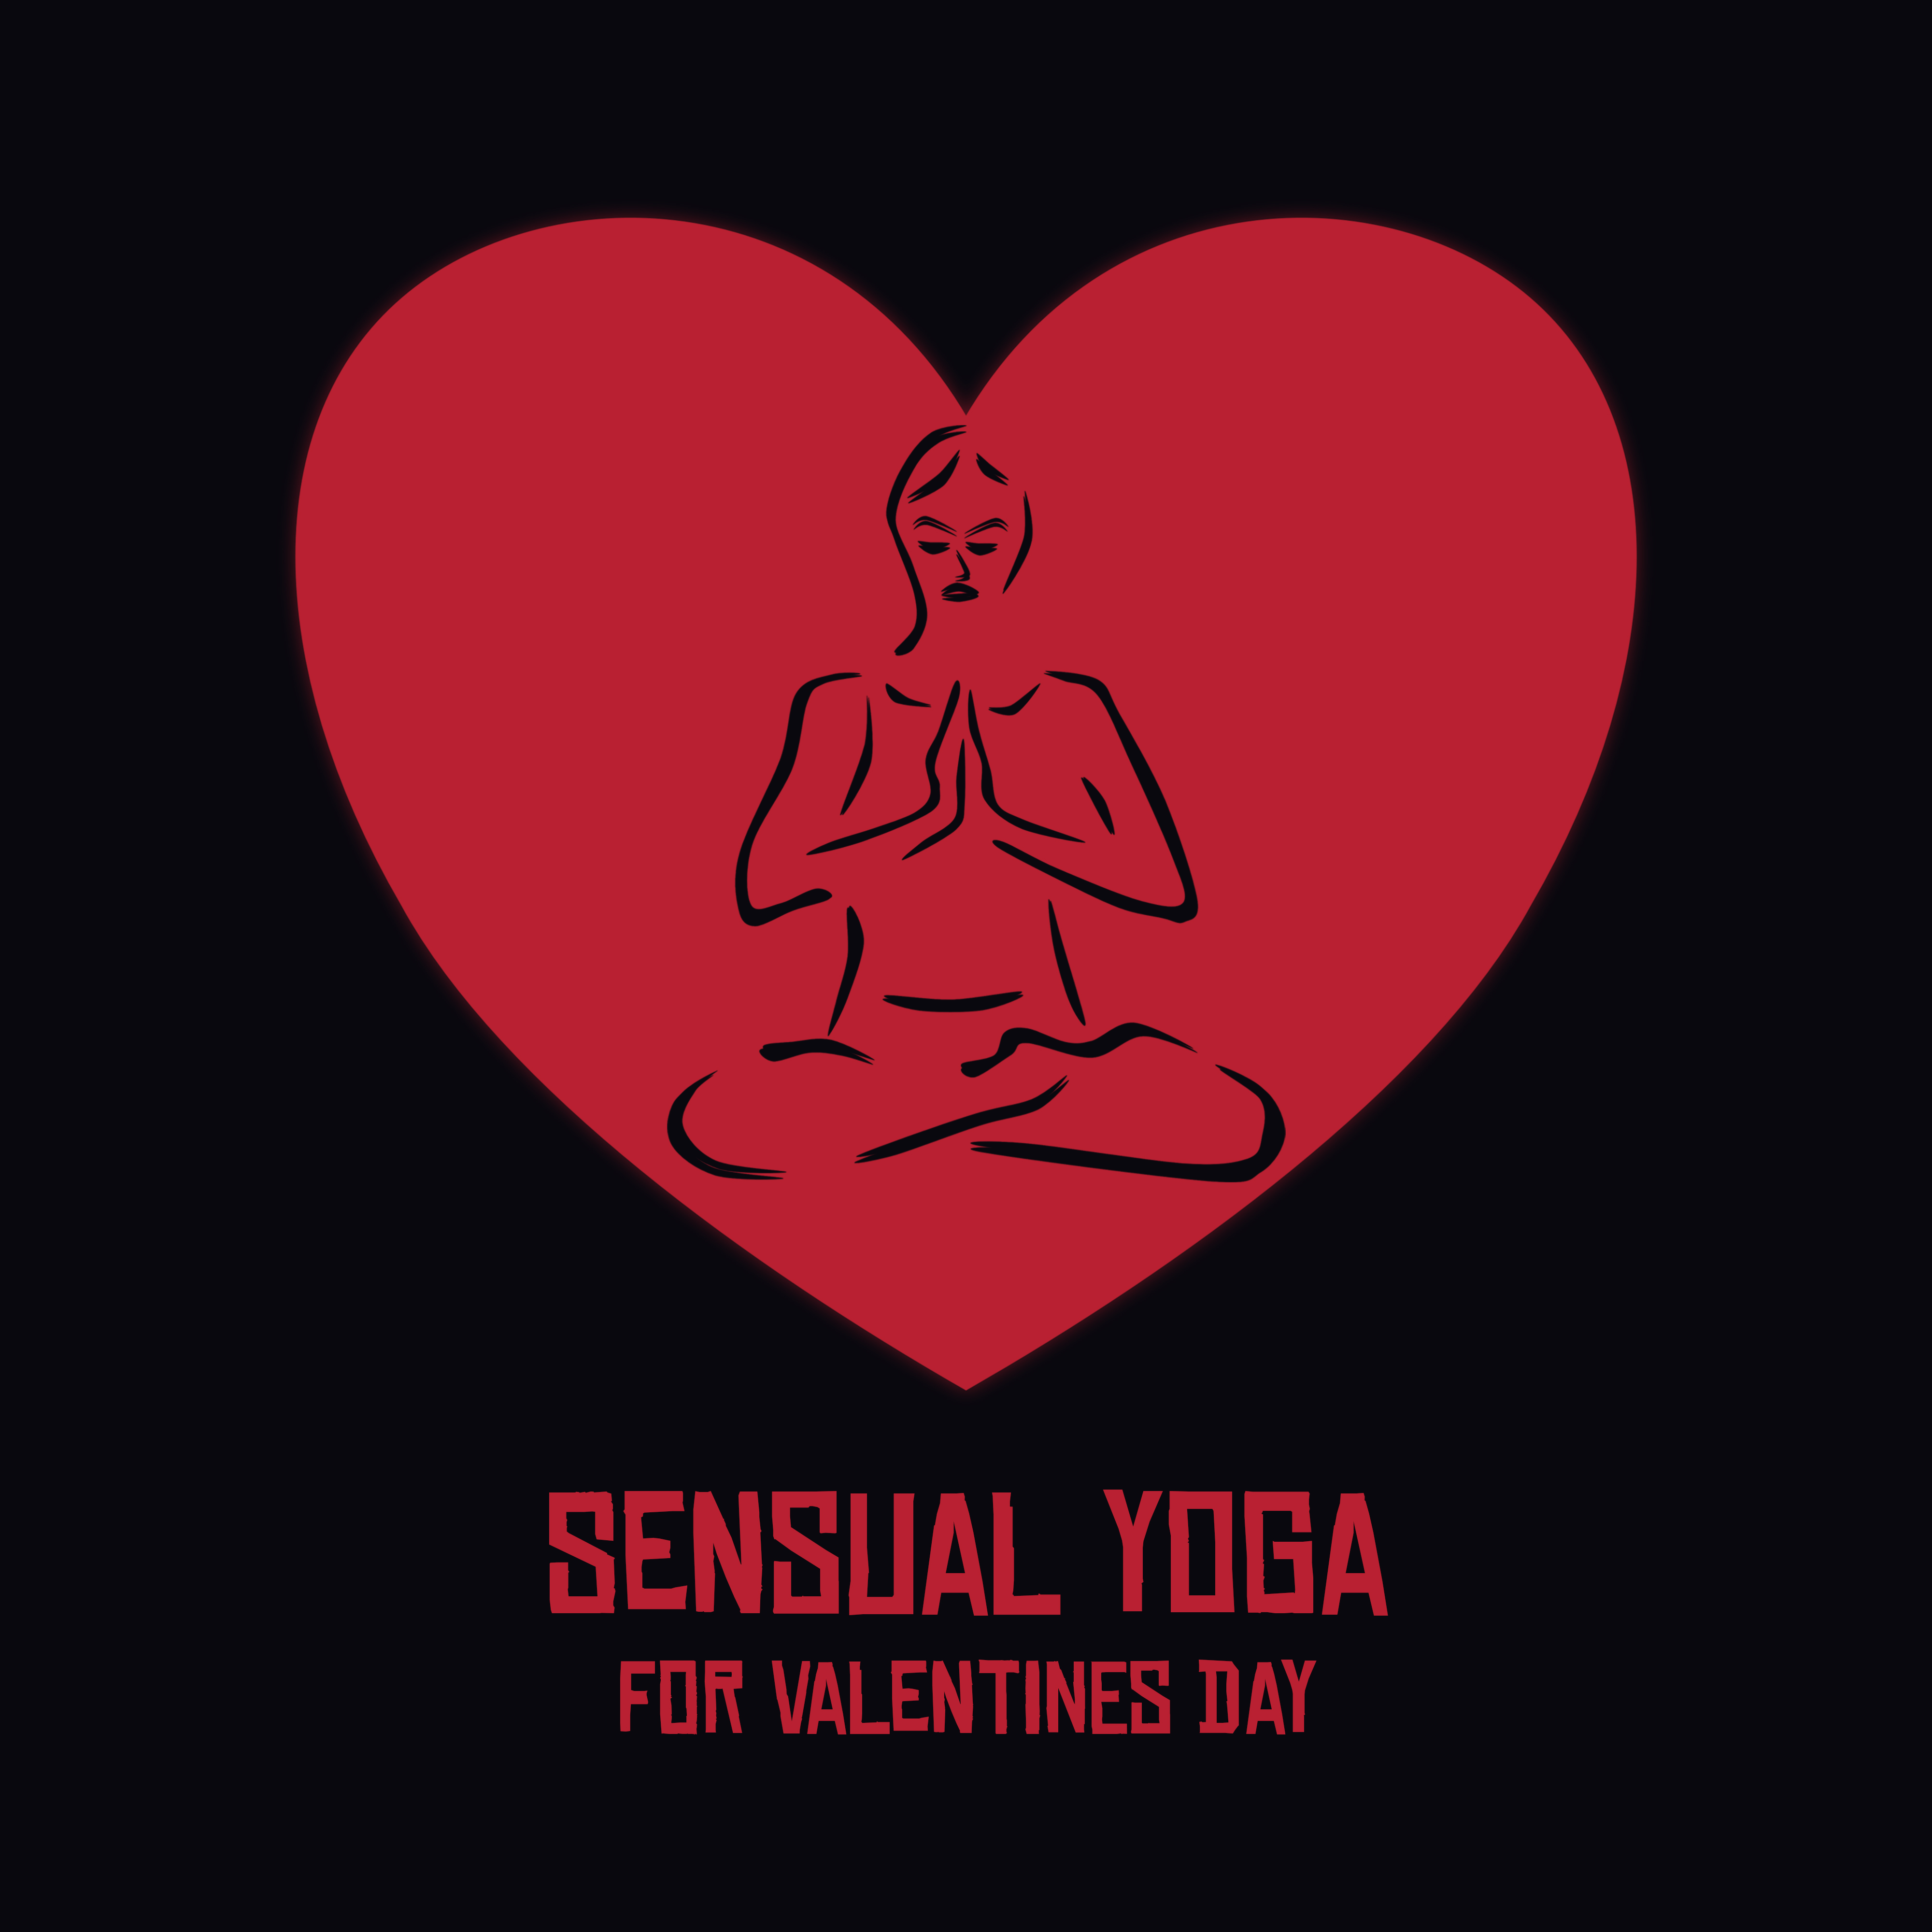 Sensual Yoga for Valentines Day – Deep Relaxation for Lovers, Meditation Music Zone, Tantric Massage, Sensual Music for Yoga Bliss